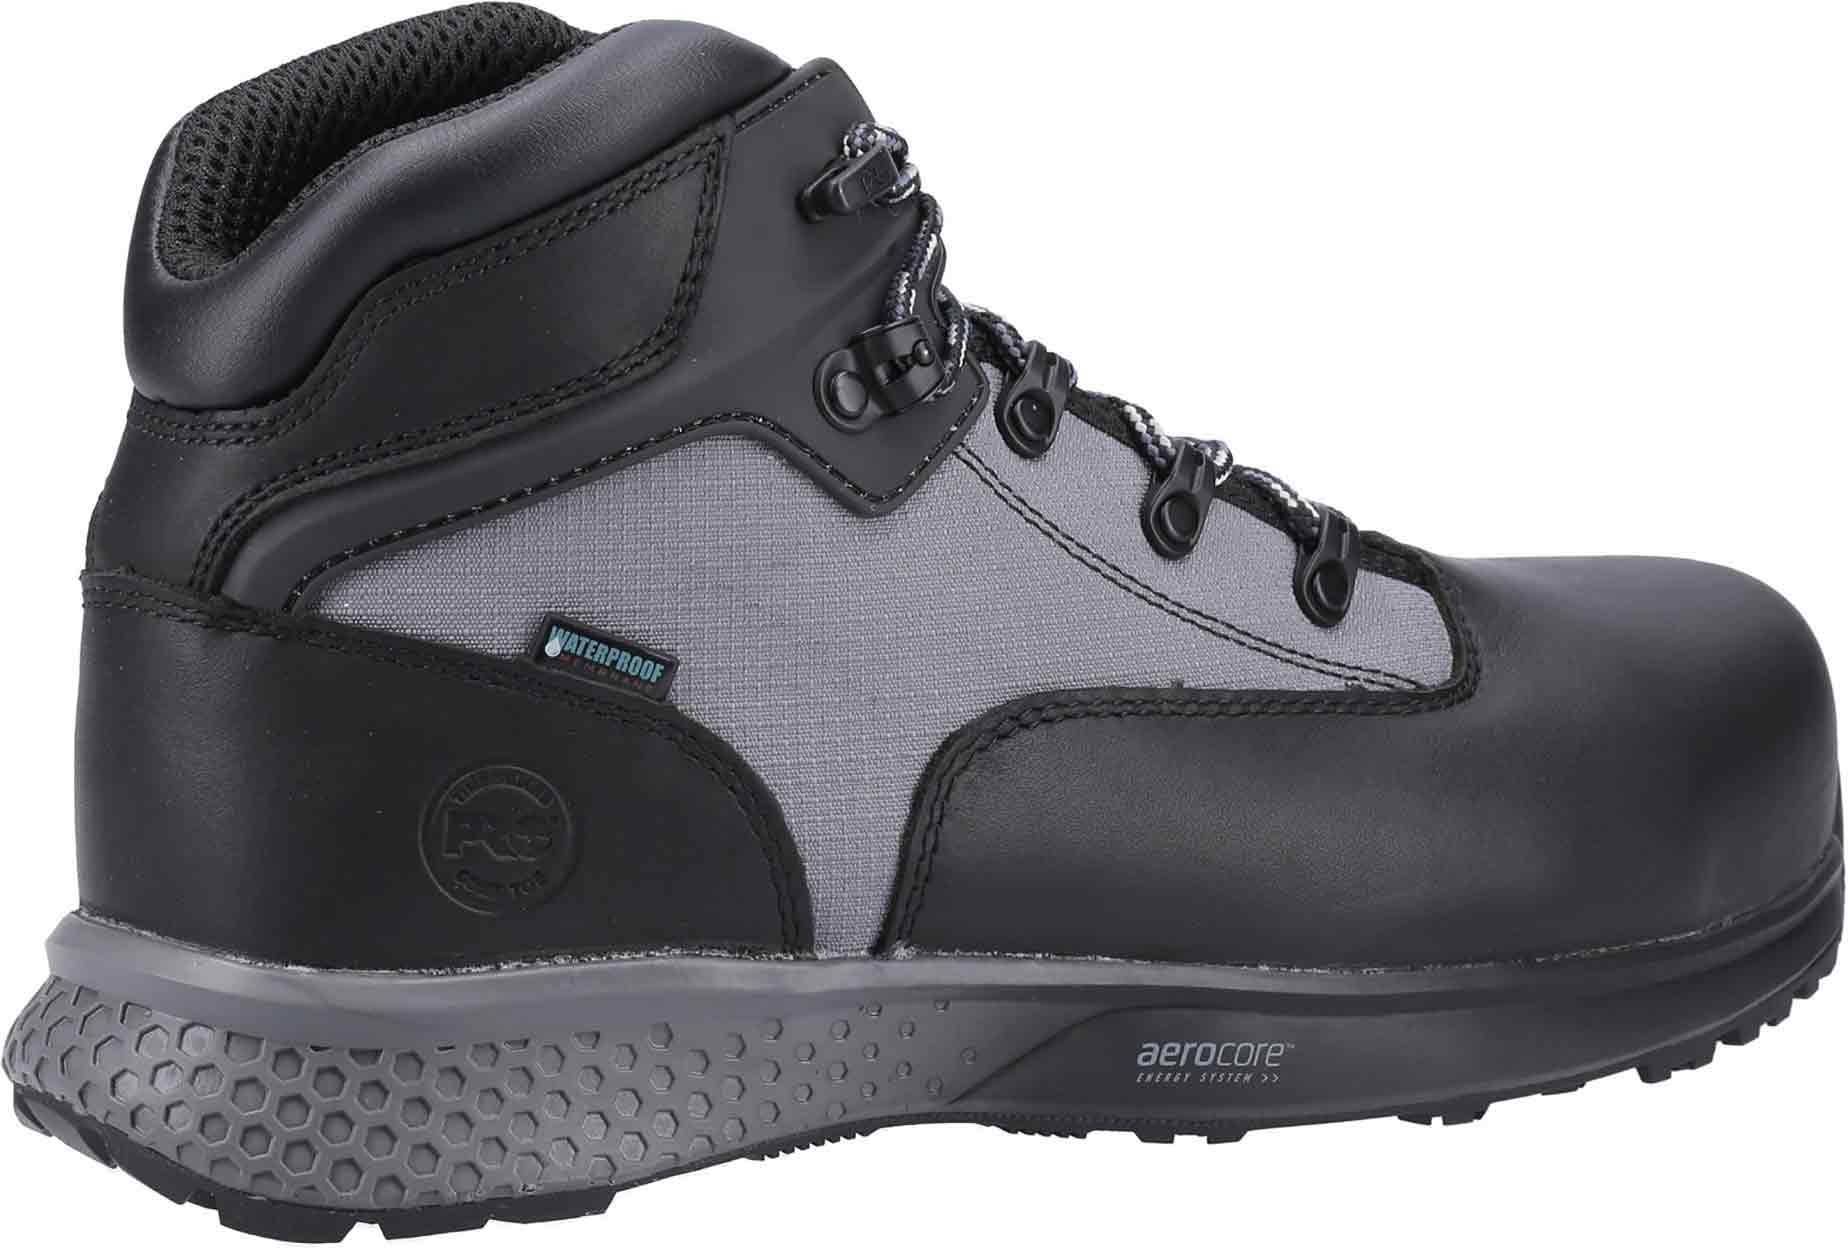 Timberland Pro Euro Hiker S3 Hiker Boot Black/Grey - Composite and Metal  Free Safety Footwear - Mens Safety Boots & Shoes - Safety Footwear - Best  Workwear